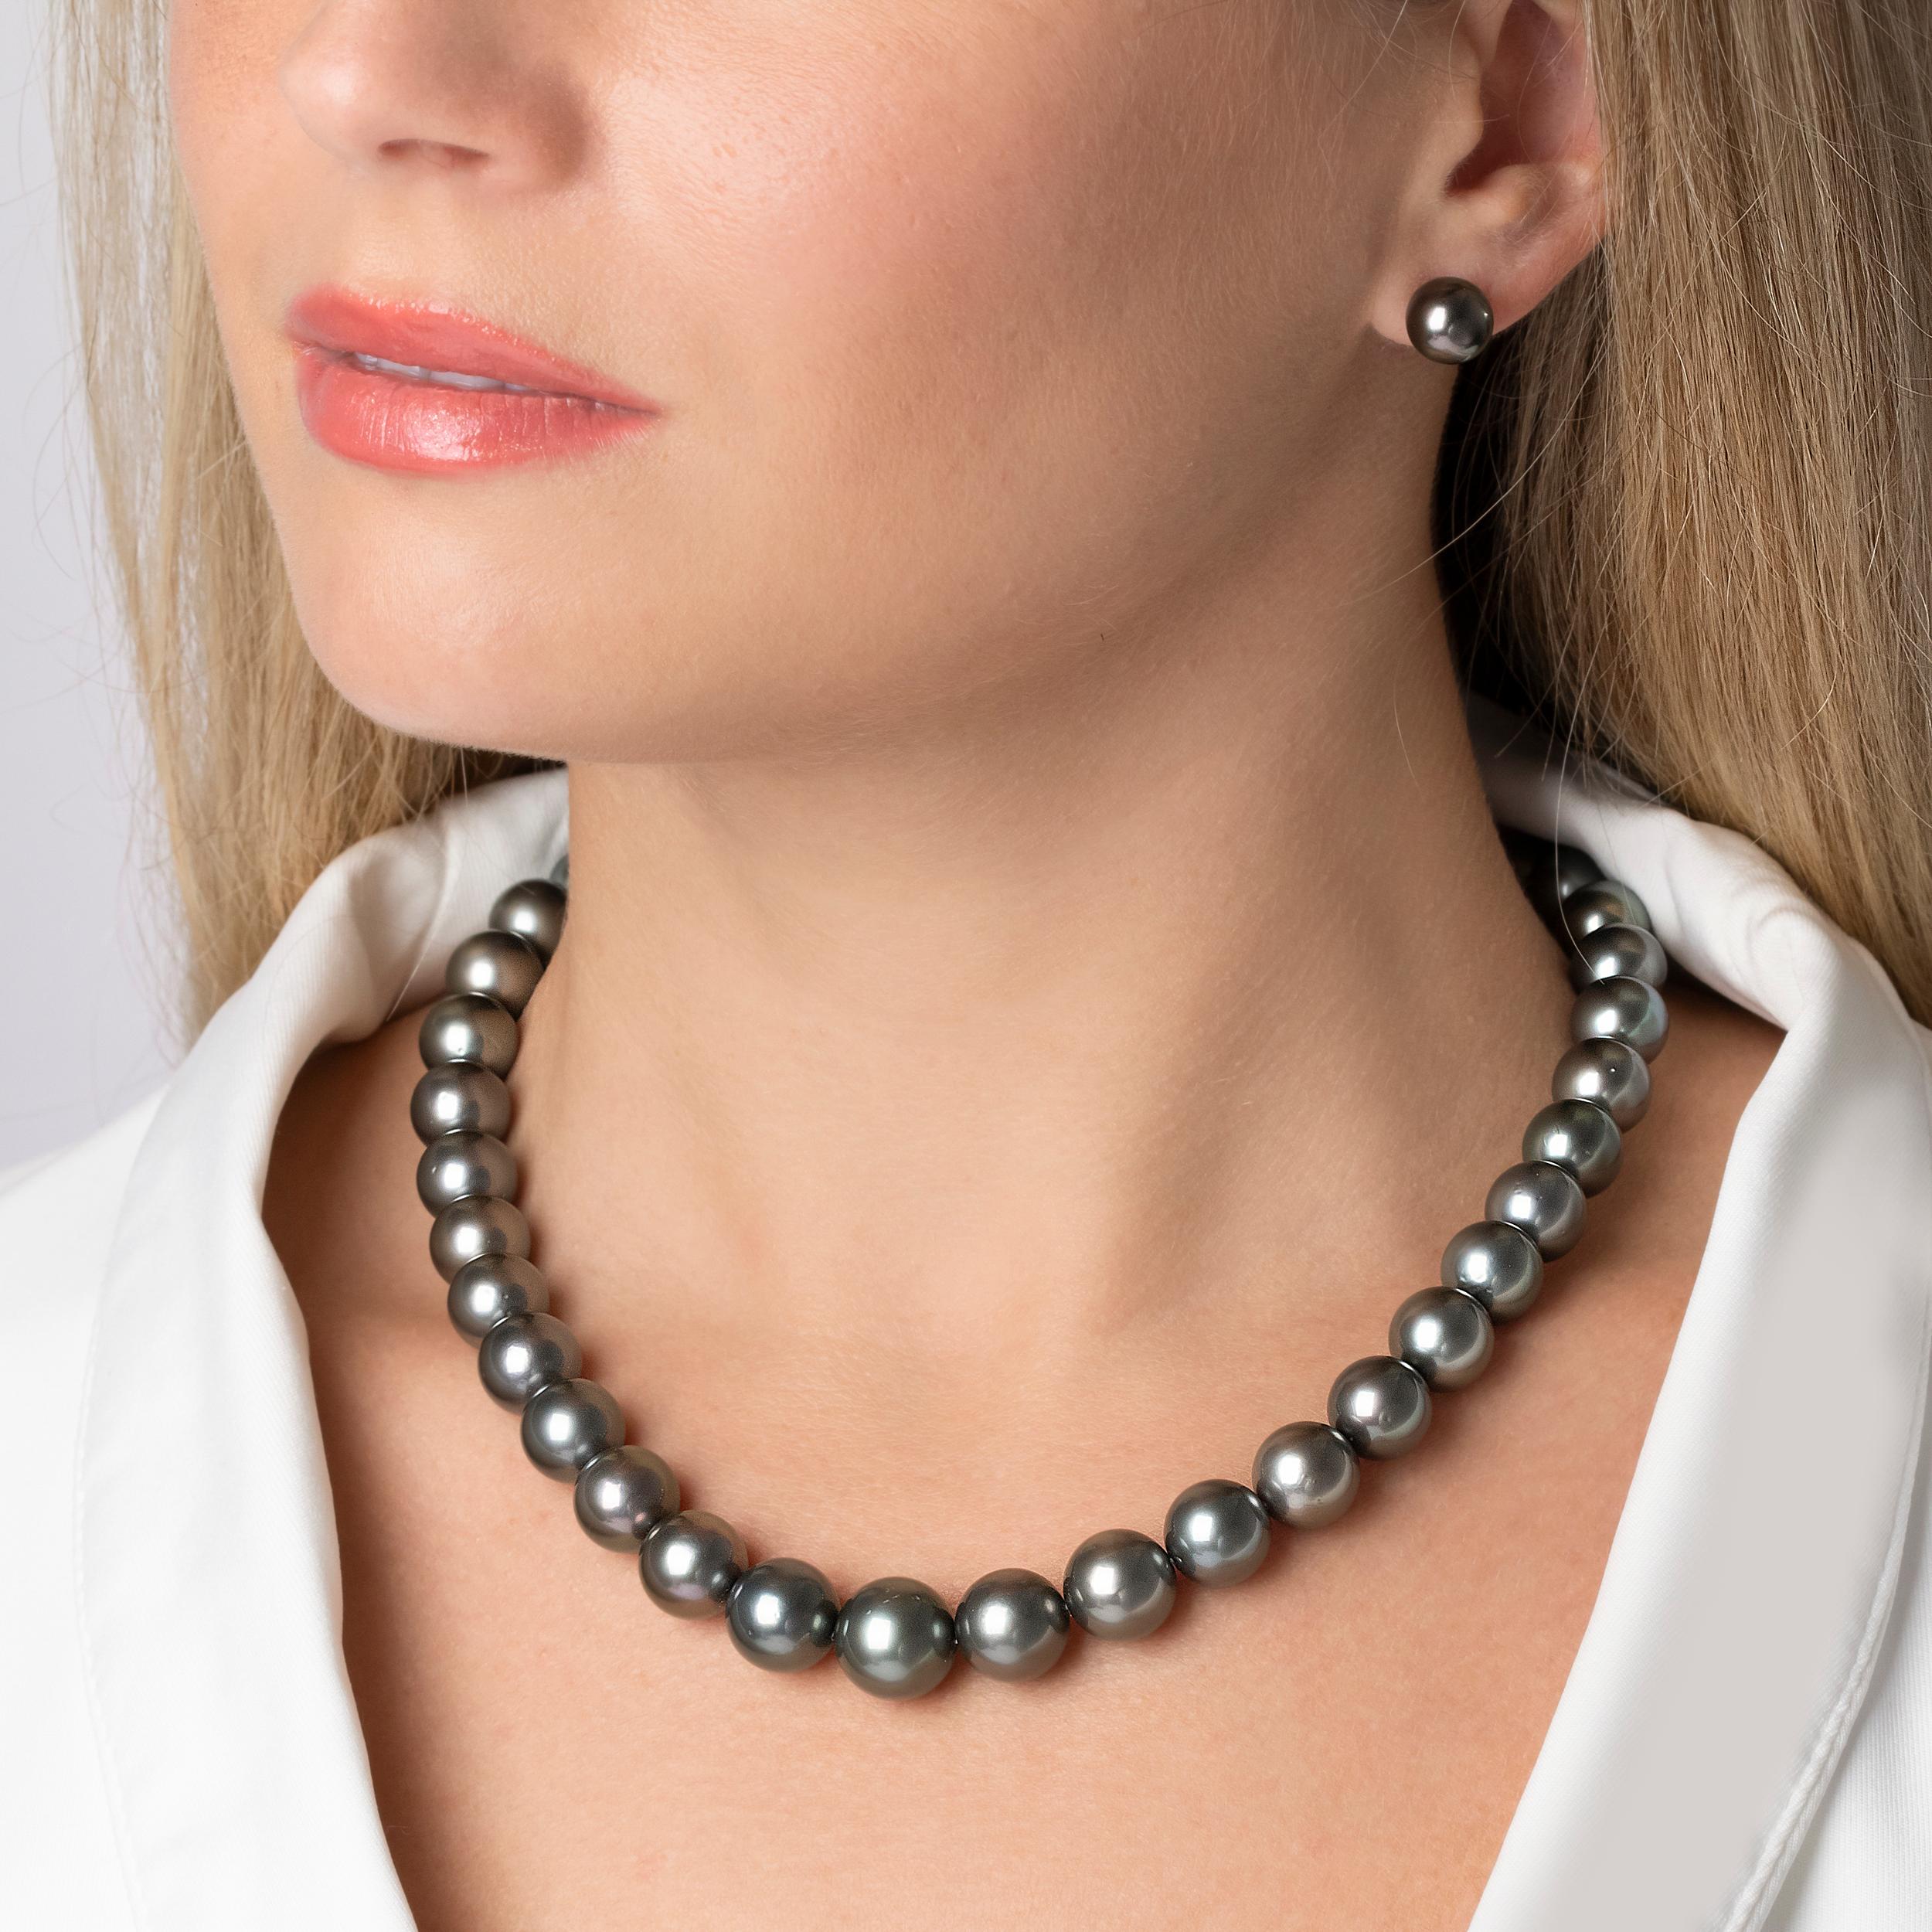 A classic necklace style formed from superb quality Tahitian pearls and strung onto an 18K White Gold clasp. Suitable for daily use or formal events, this necklace will add a sophisticated twist to any outfit. Style with matching studs and other